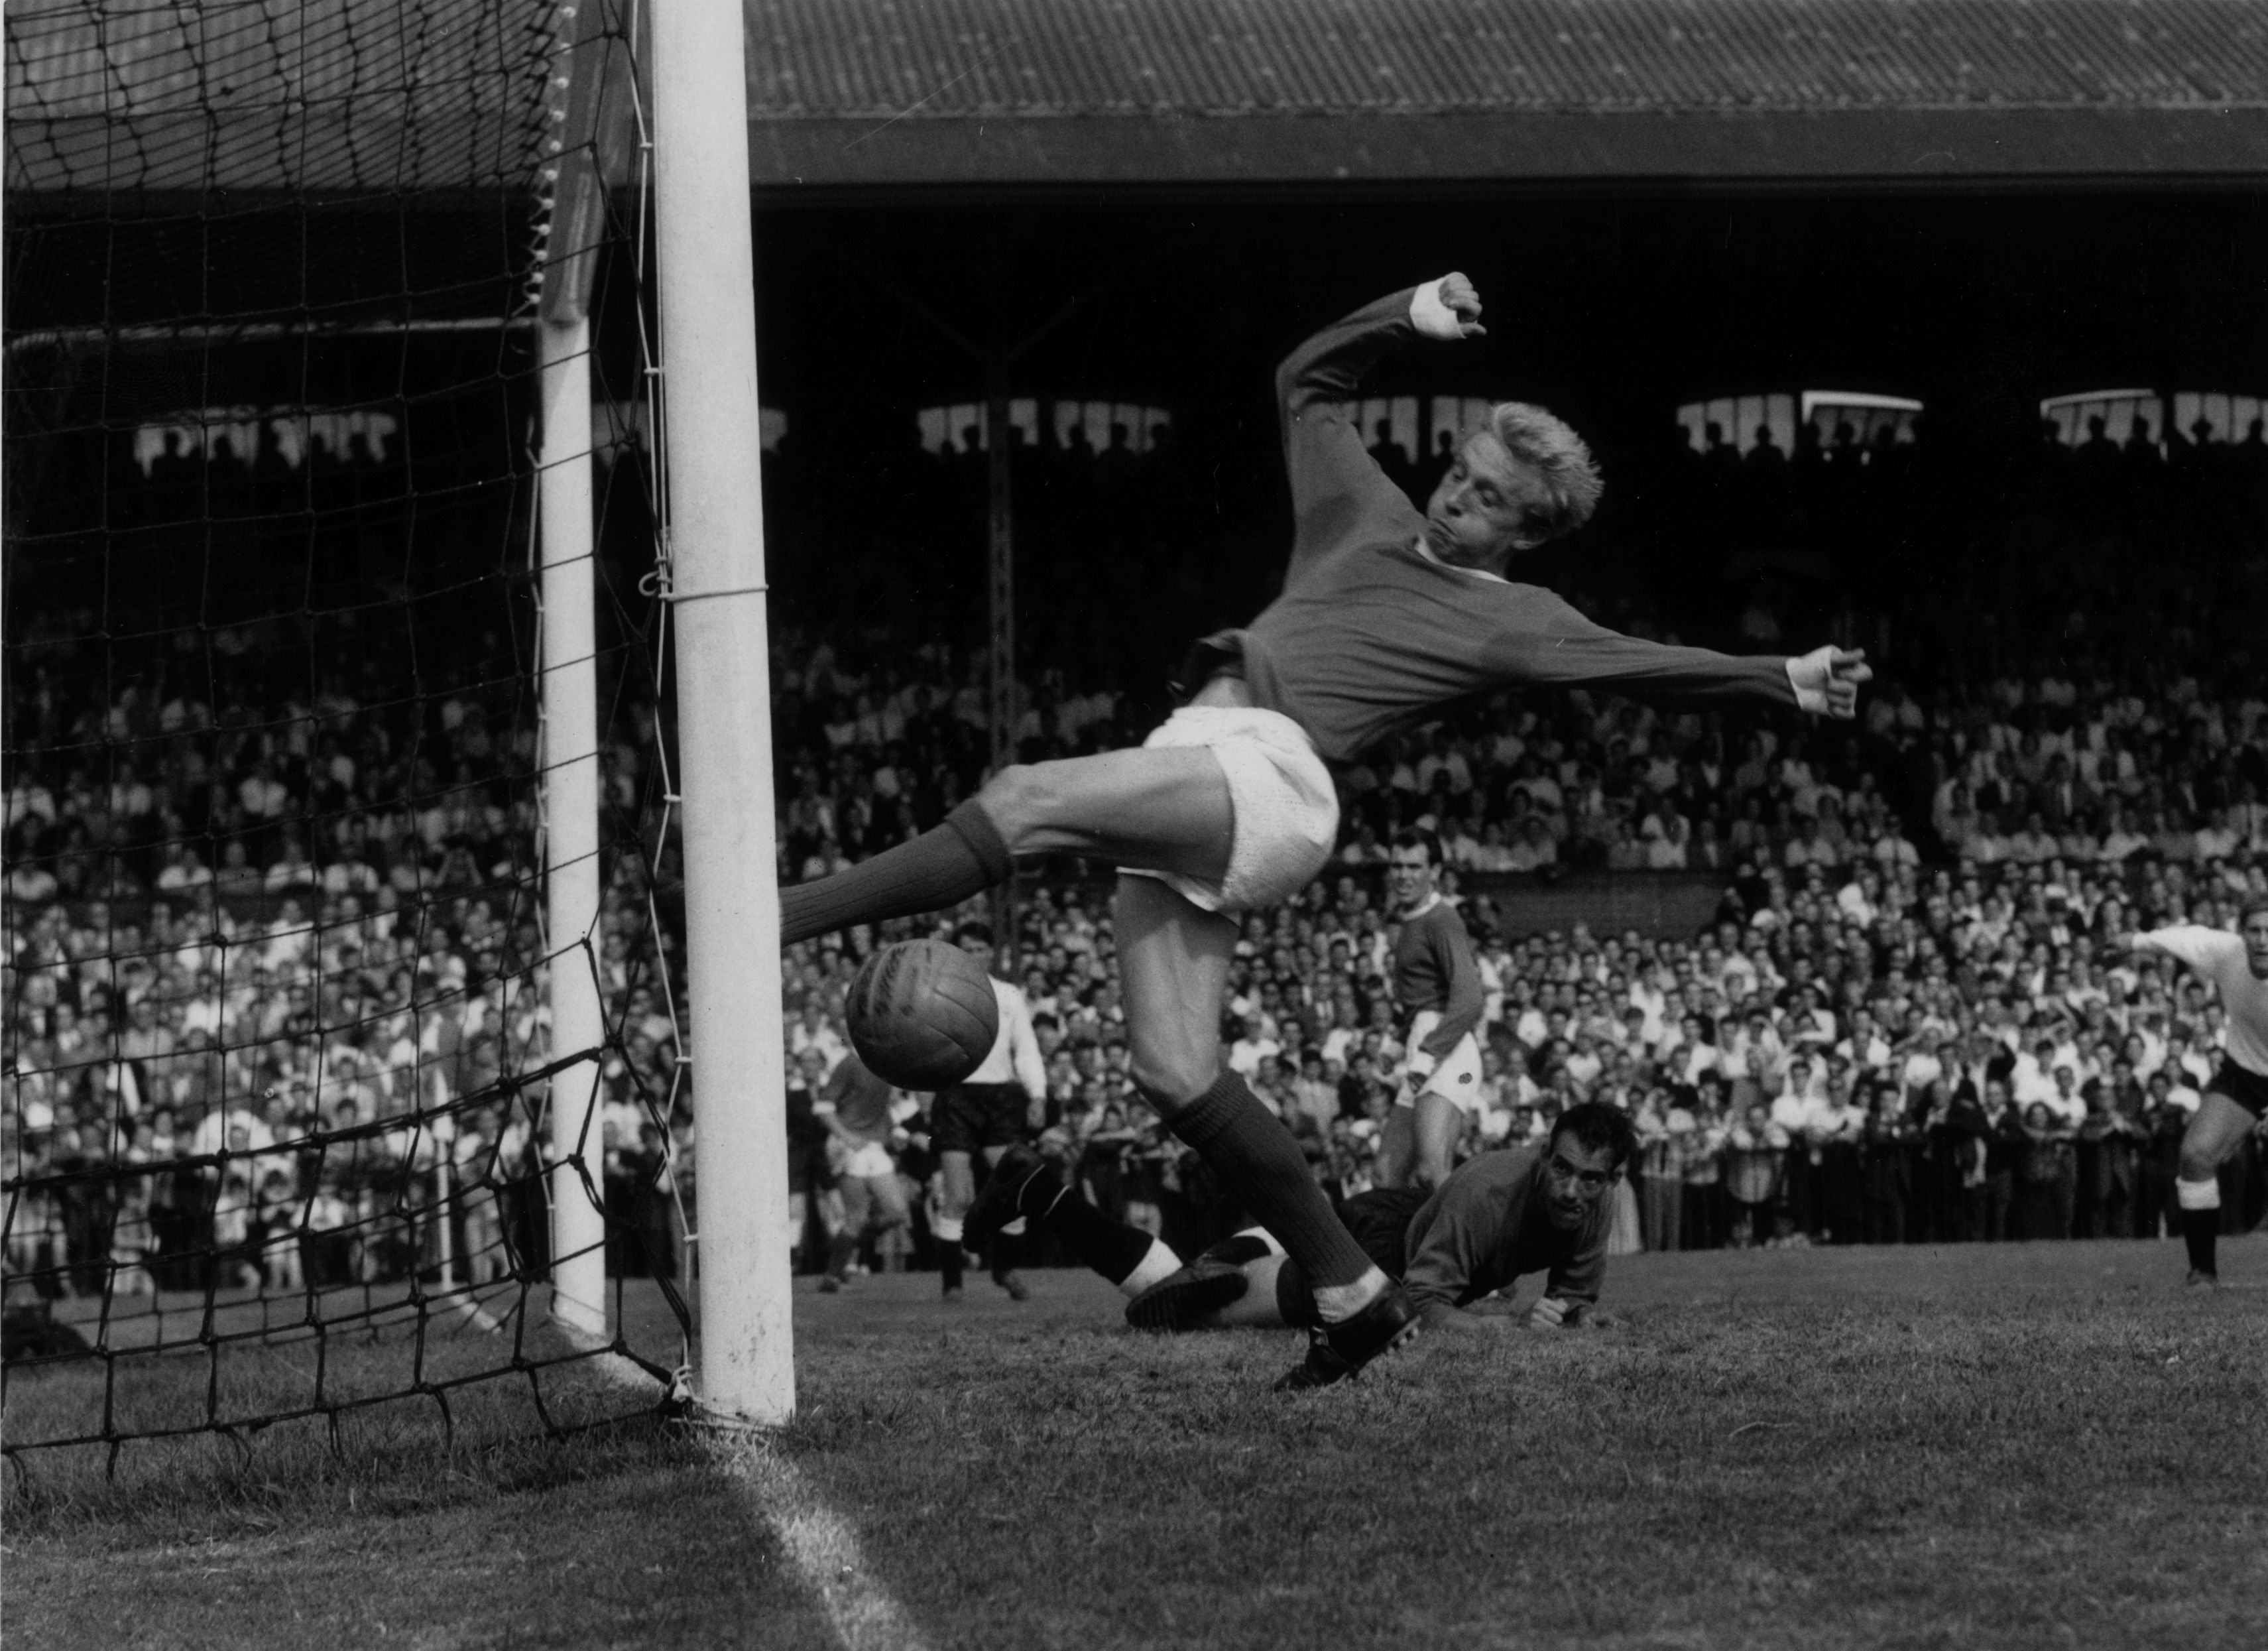 Manchester Derby | A Denis Law back-heel, pitch invasion, and Manchester United's relegation